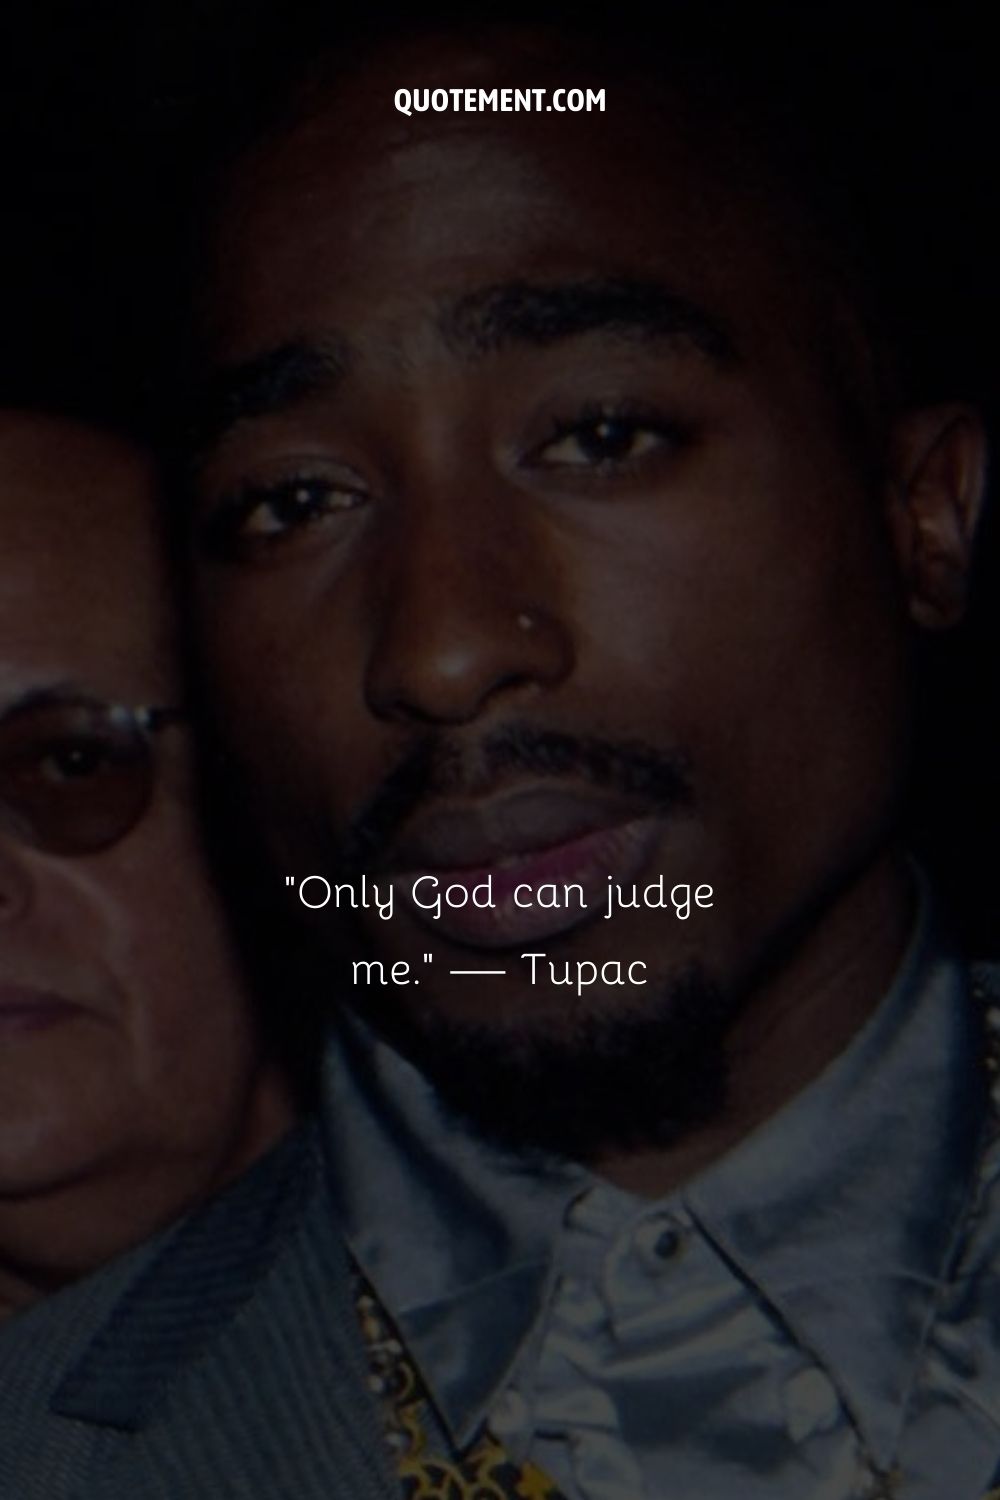 The most famous Tupac quote.